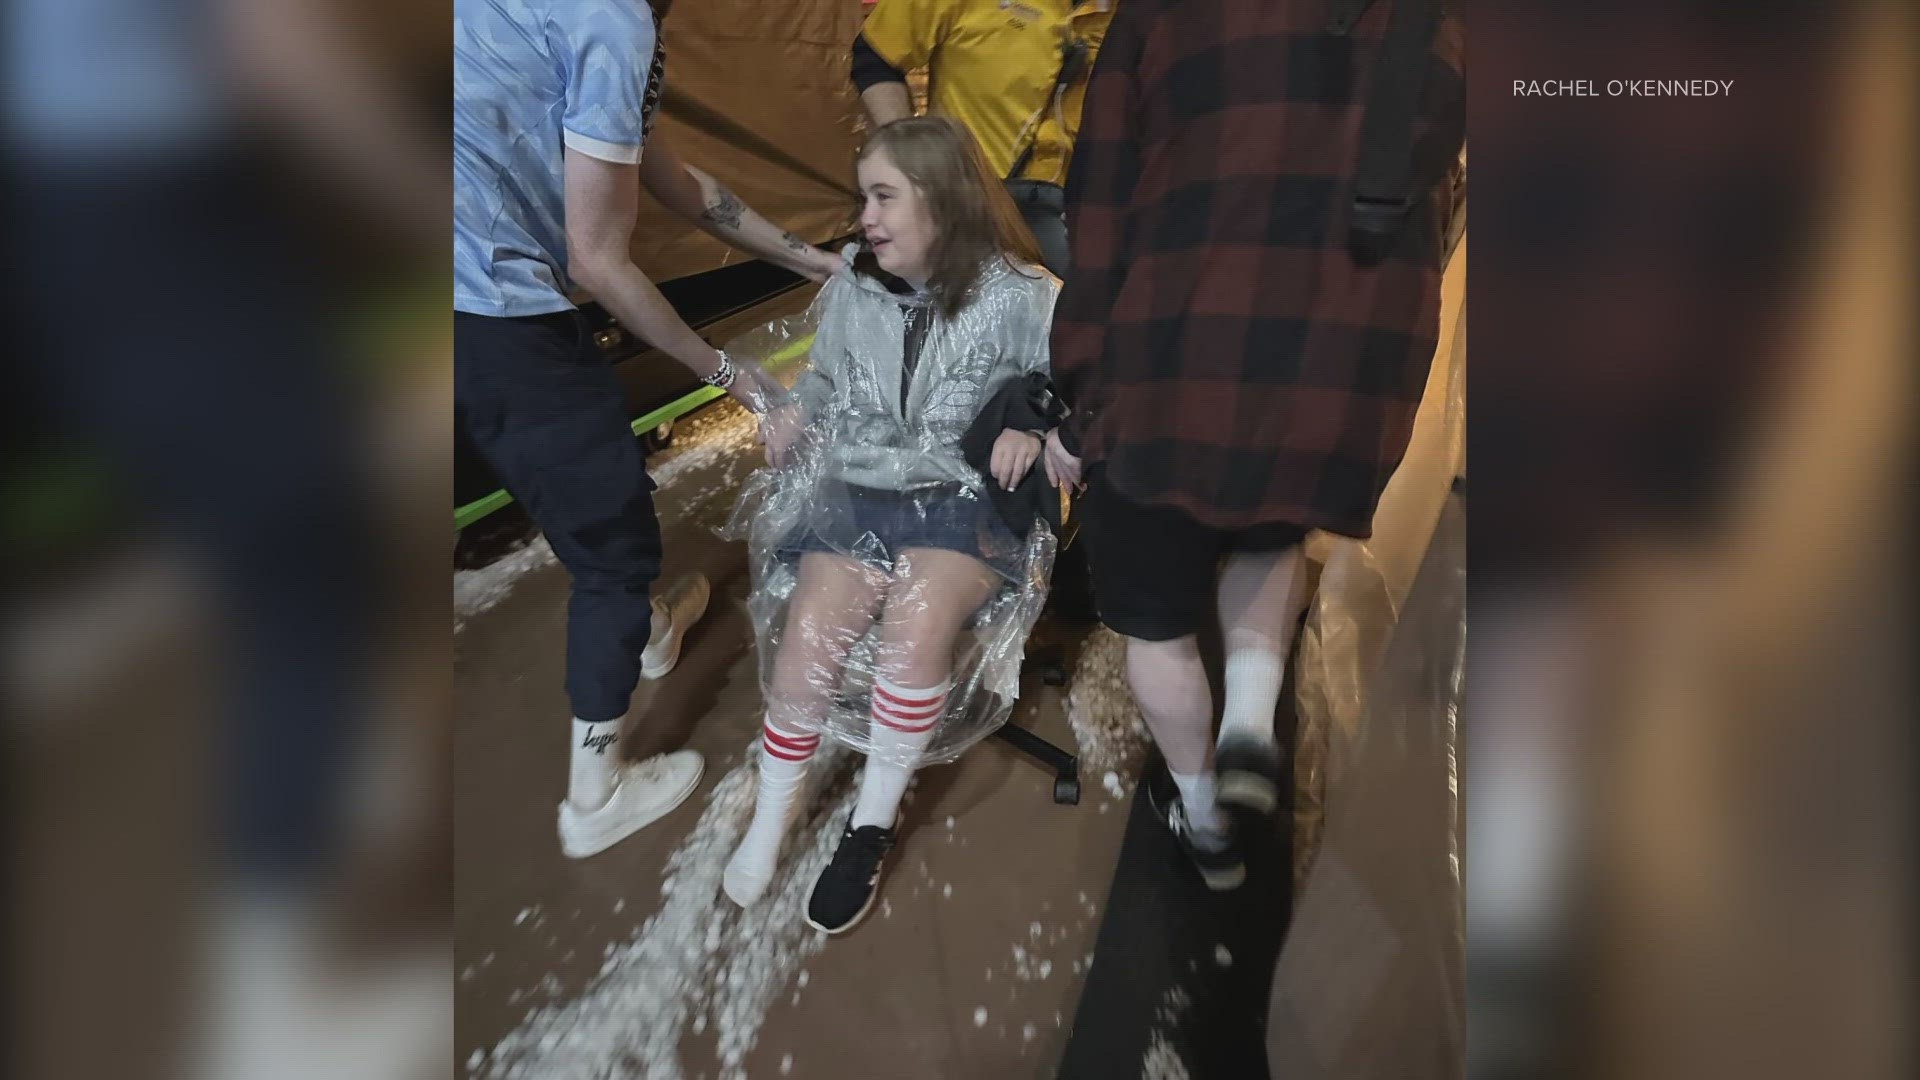 Rachel O’Kennedy was at the Red Rocks concert with her two daughters when the hail storm hit.